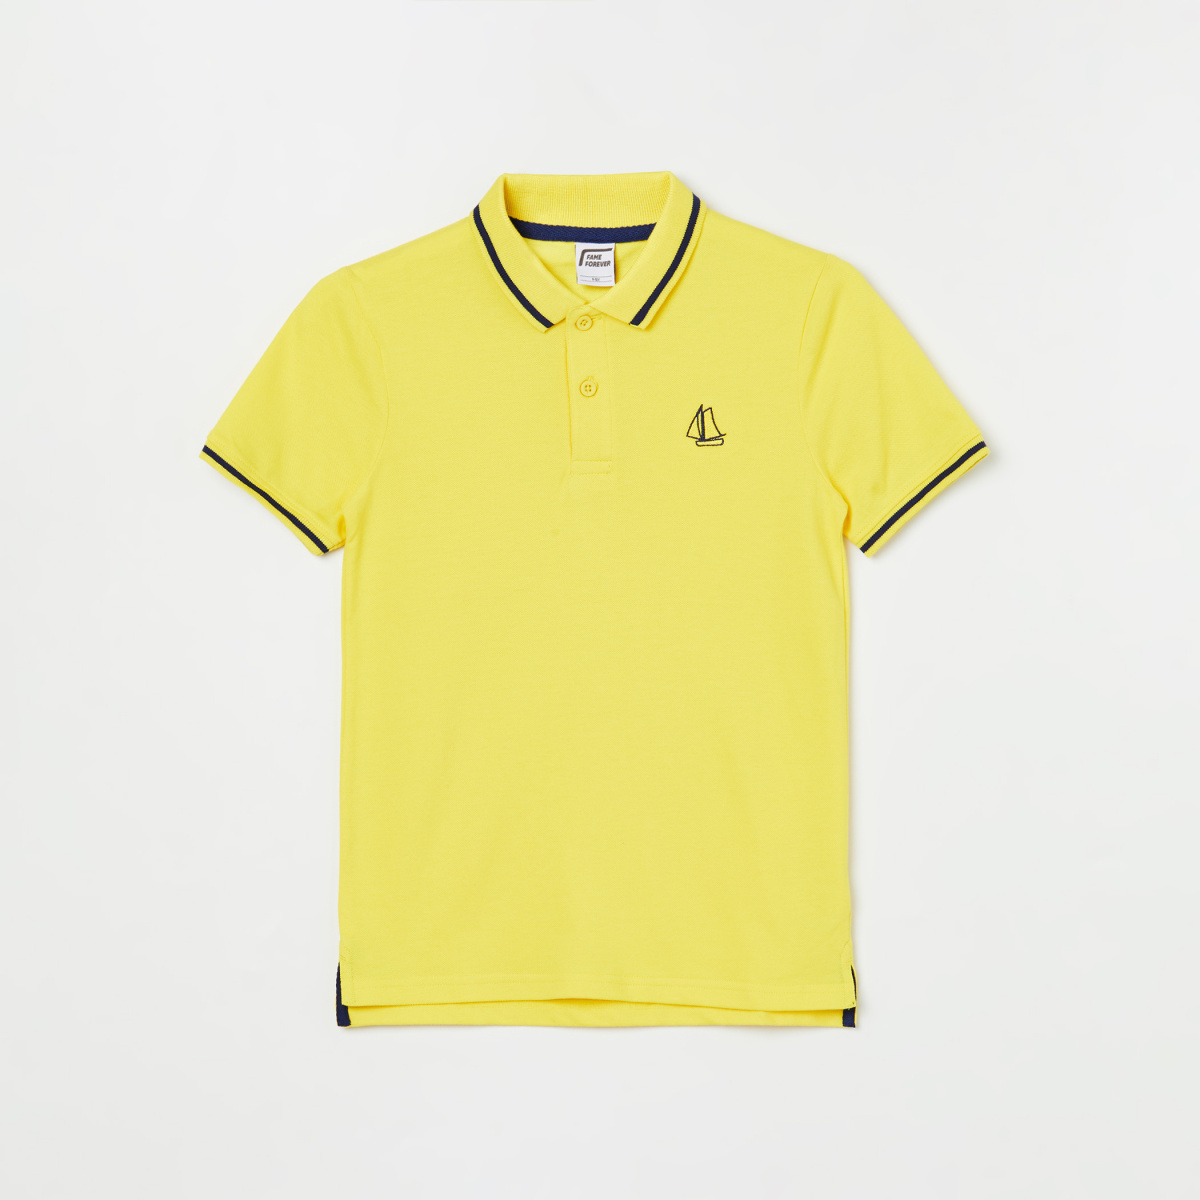 FAME FOREVER YOUNG Boys Solid Polo T-shirt